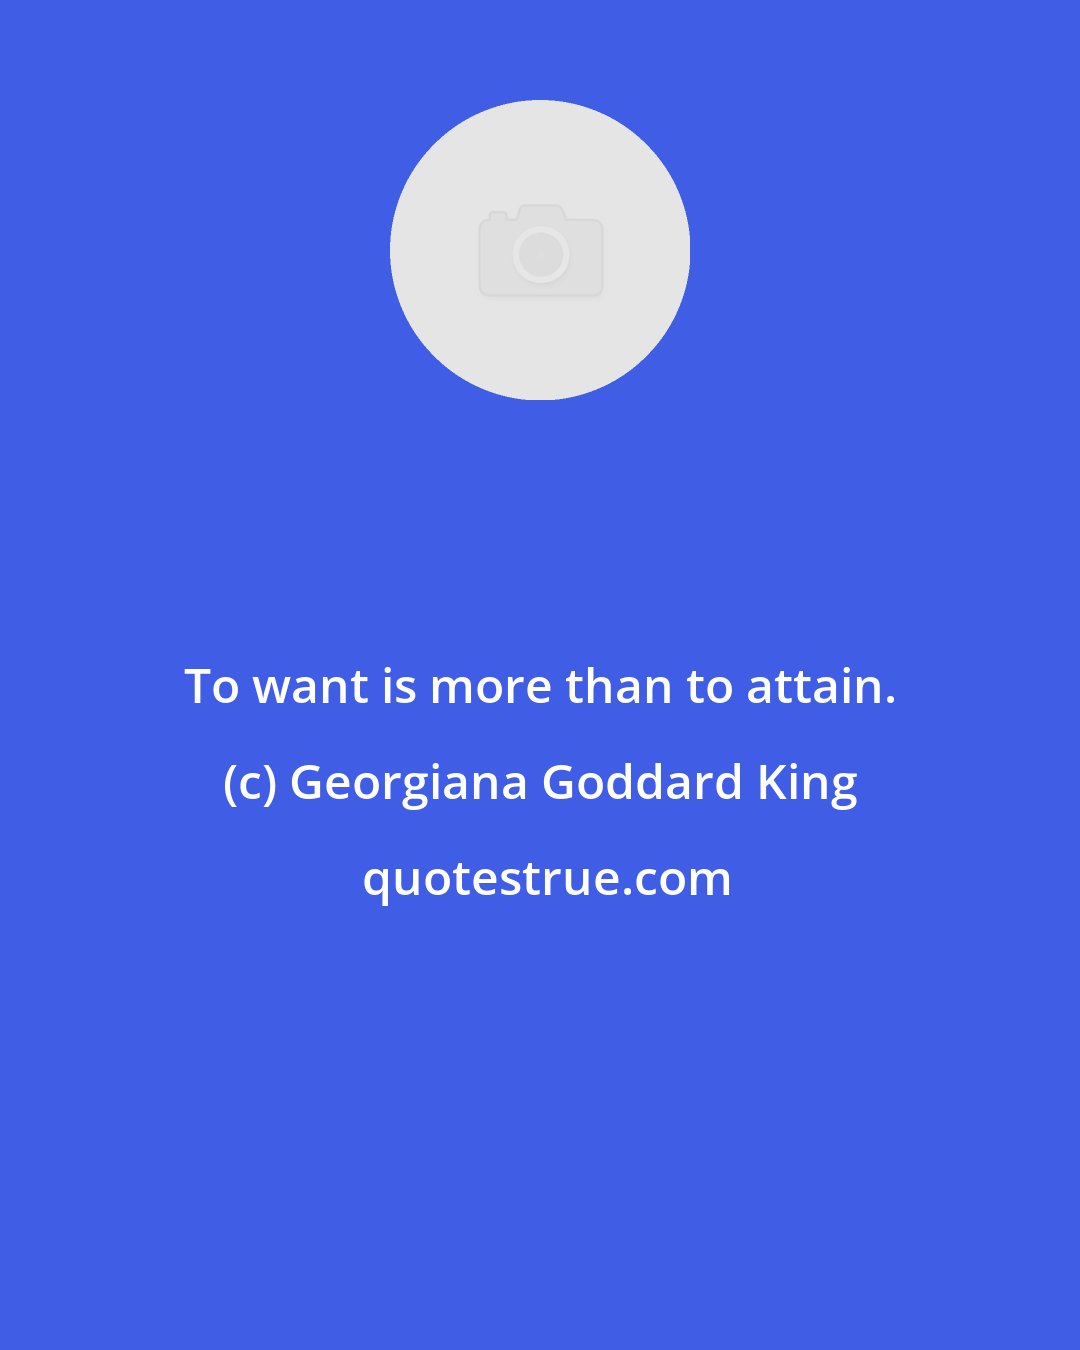 Georgiana Goddard King: To want is more than to attain.